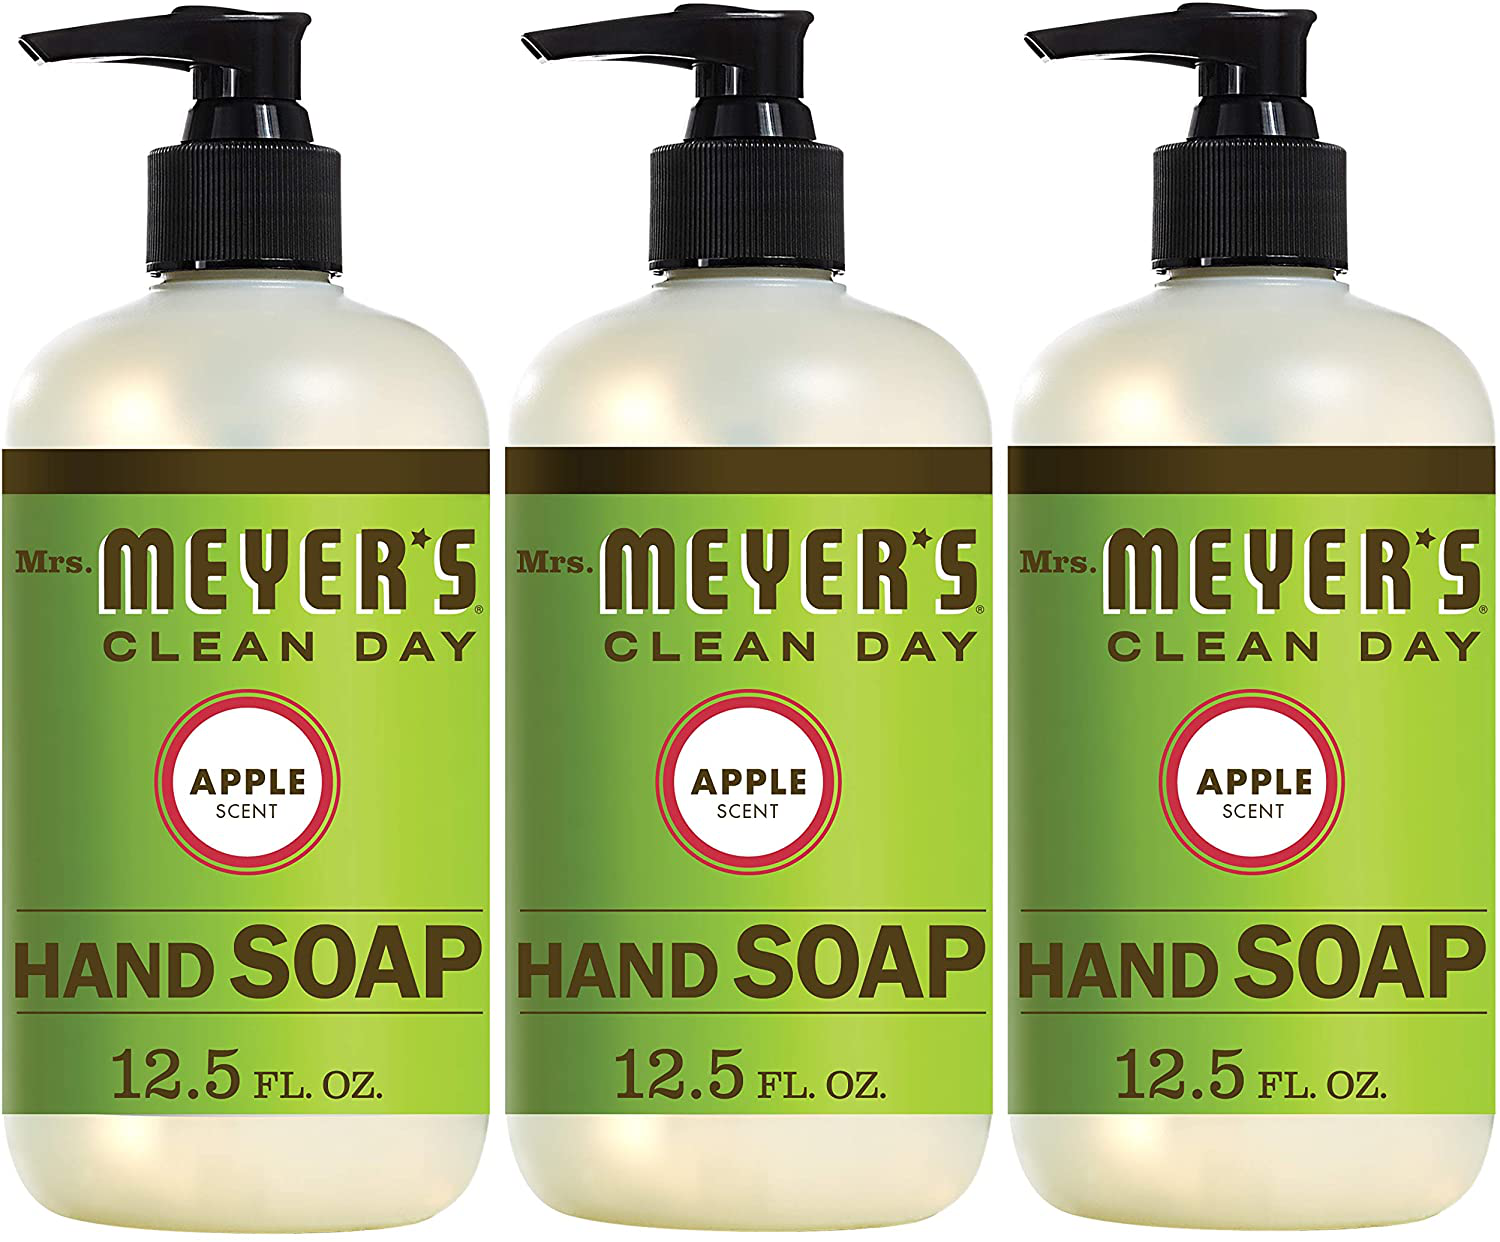 Mrs. Meyer's Clean Day Liquid Hand Soap, Cruelty Free and Biodegradable Hand Wash Formula Made with Essential Oils, Apple Scent, 12.5 oz - Pack of 3